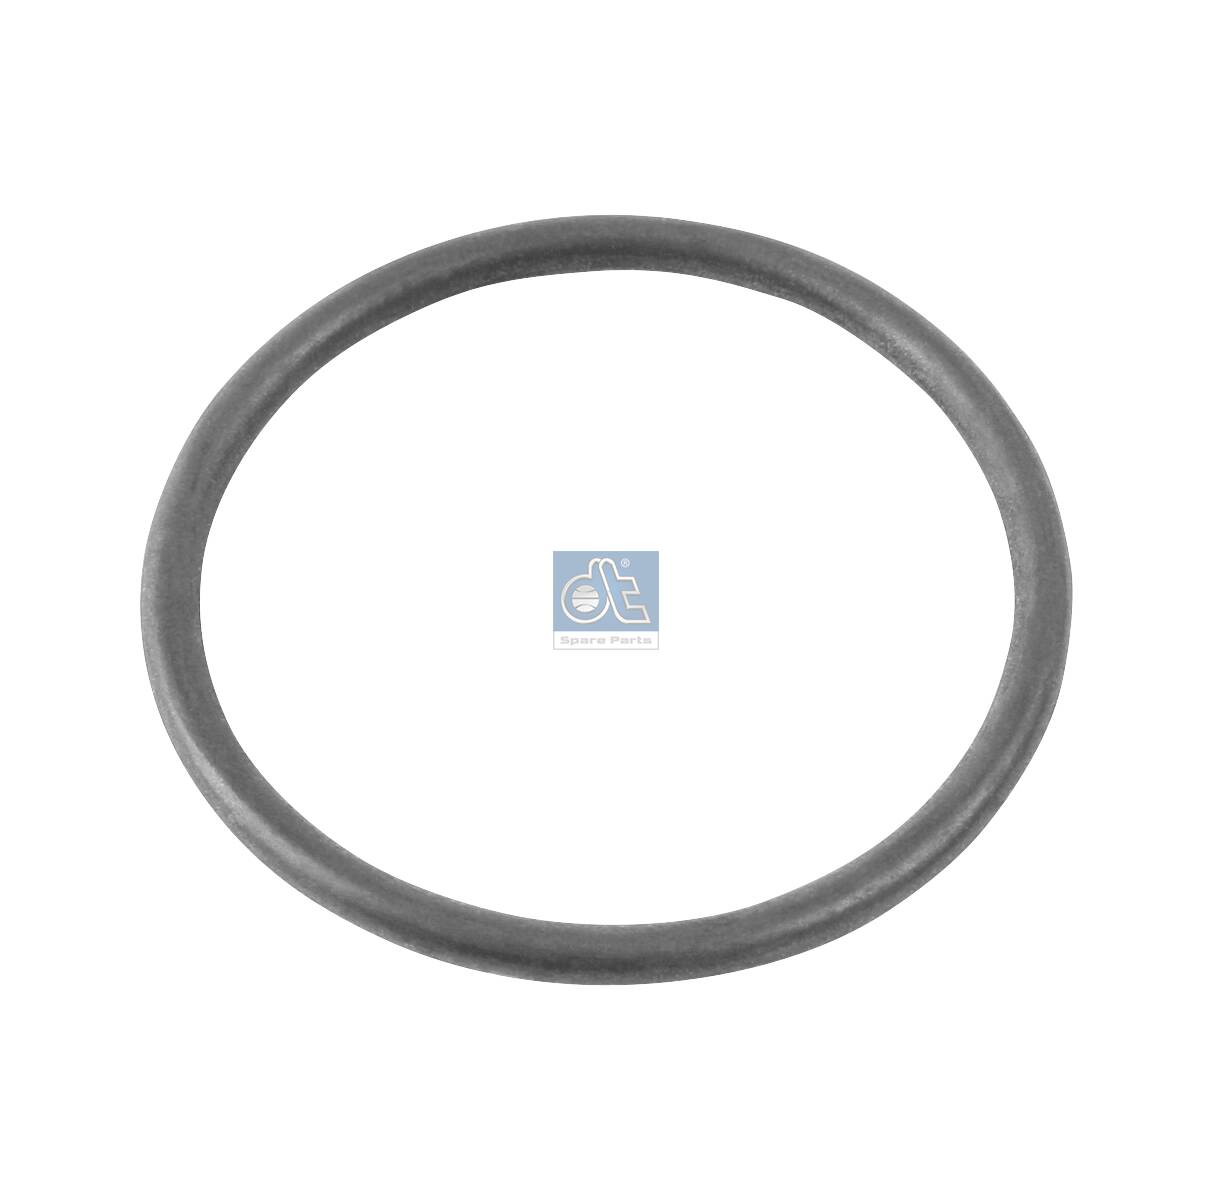 4.20312, Seal Ring, DT Spare Parts, 0189971148, 13948610, 7400948610, 948610, A0189971148, 102116, 115.901, 124988, 139.927, 3950X300FPM80, 40-76022-00, 571.385, 88.17.0228, 004427, 40-76144-00, 601.27.115.04.9, 70241, 915.076, OR-8610